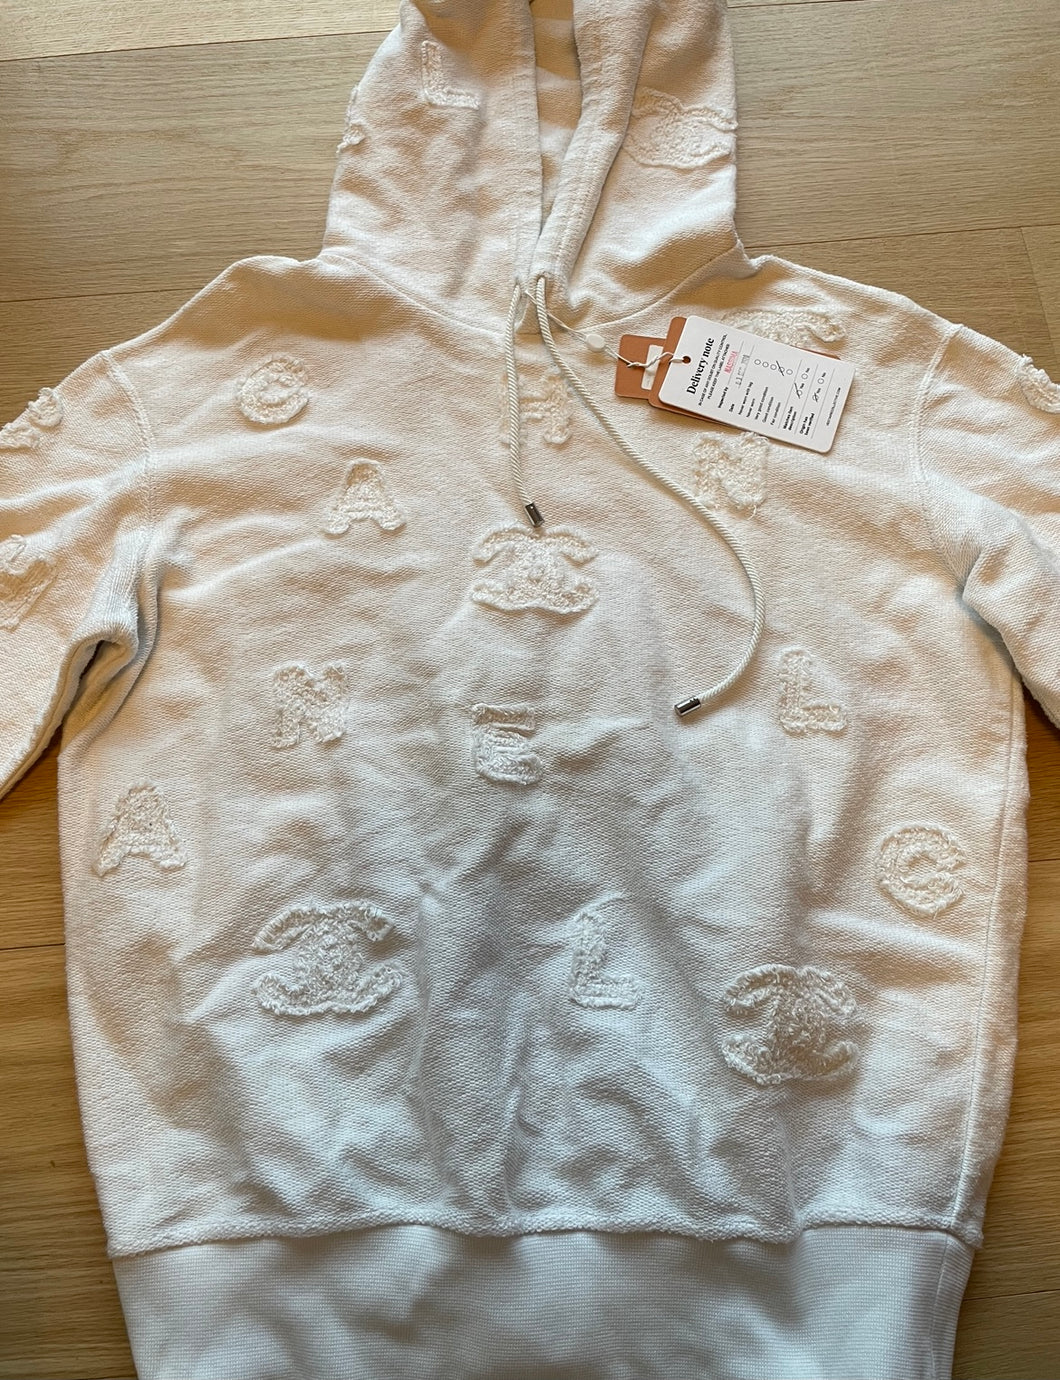 Chanel White Hoodie in size S - Lou's Closet